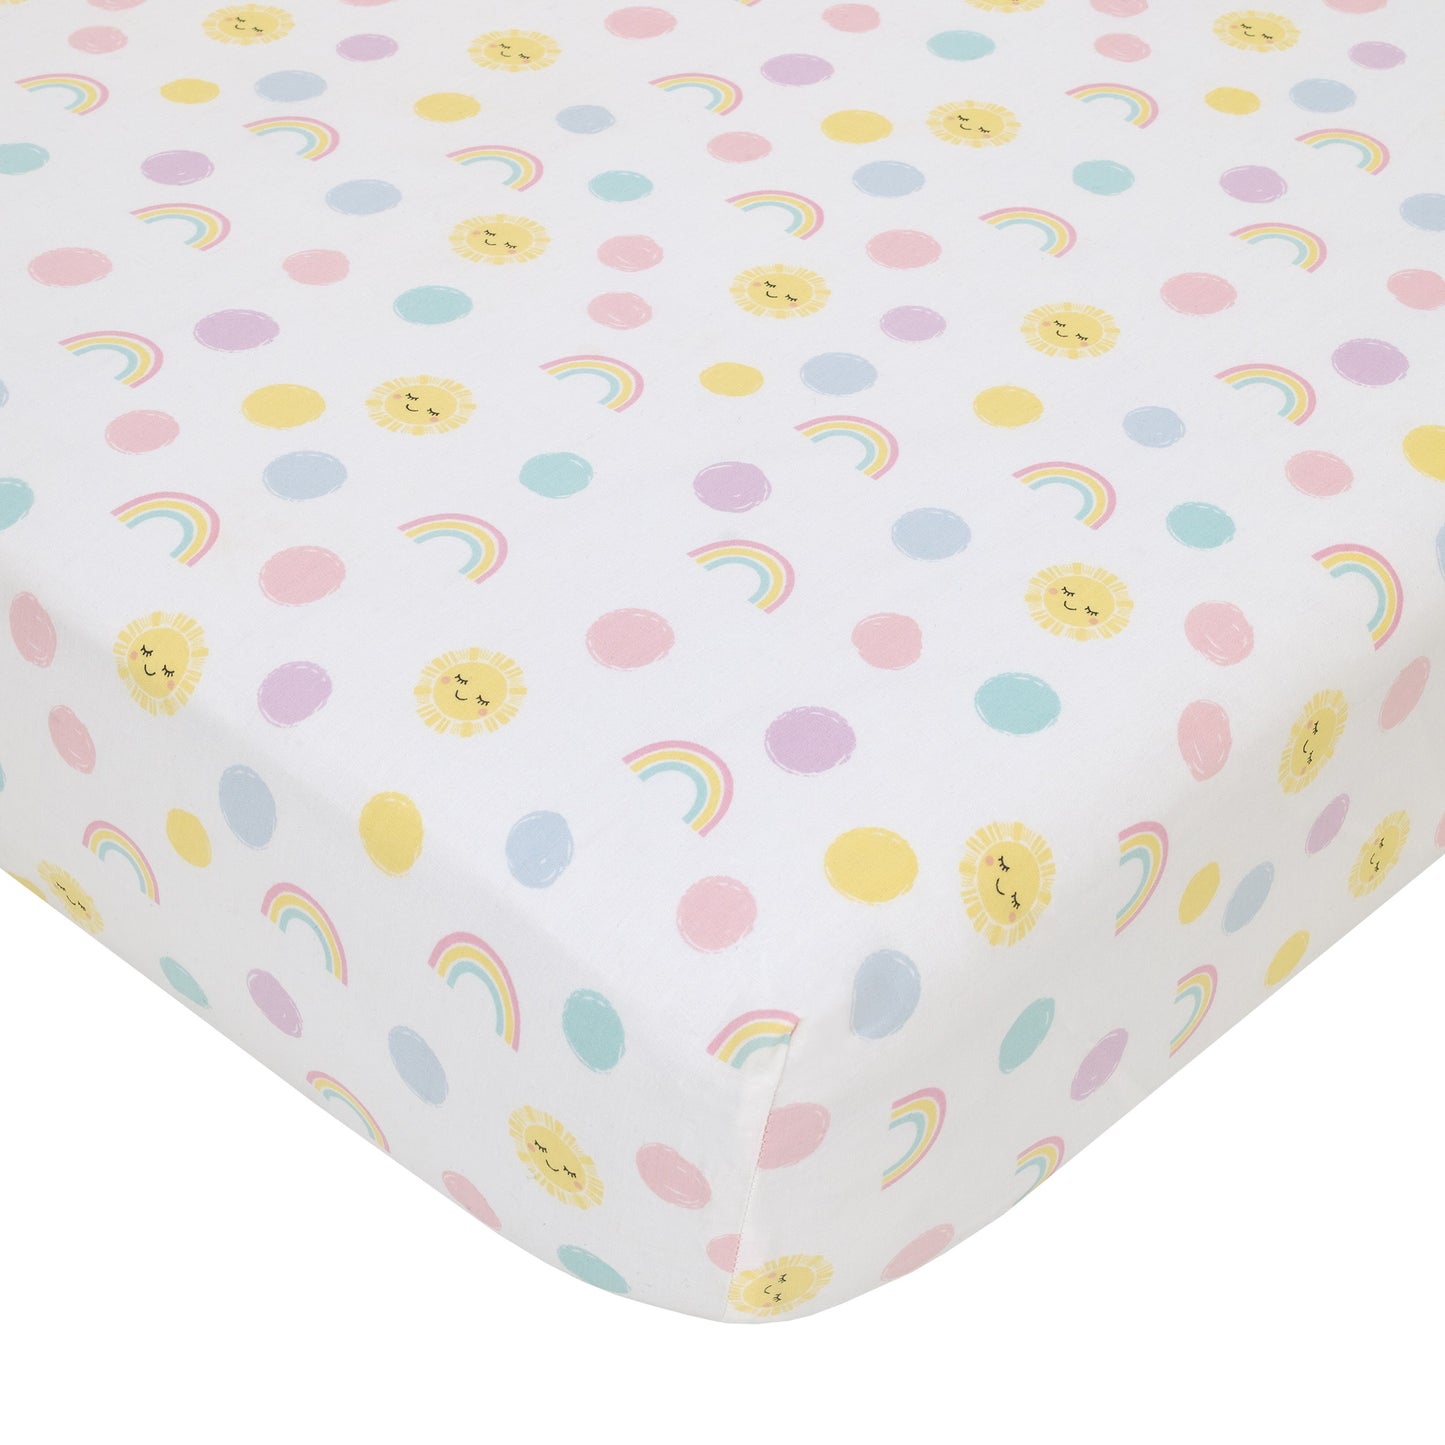 NoJo Happy Days Multicolored Rainbows and Suns 100% Cotton Nursery Fitted Crib Sheet.